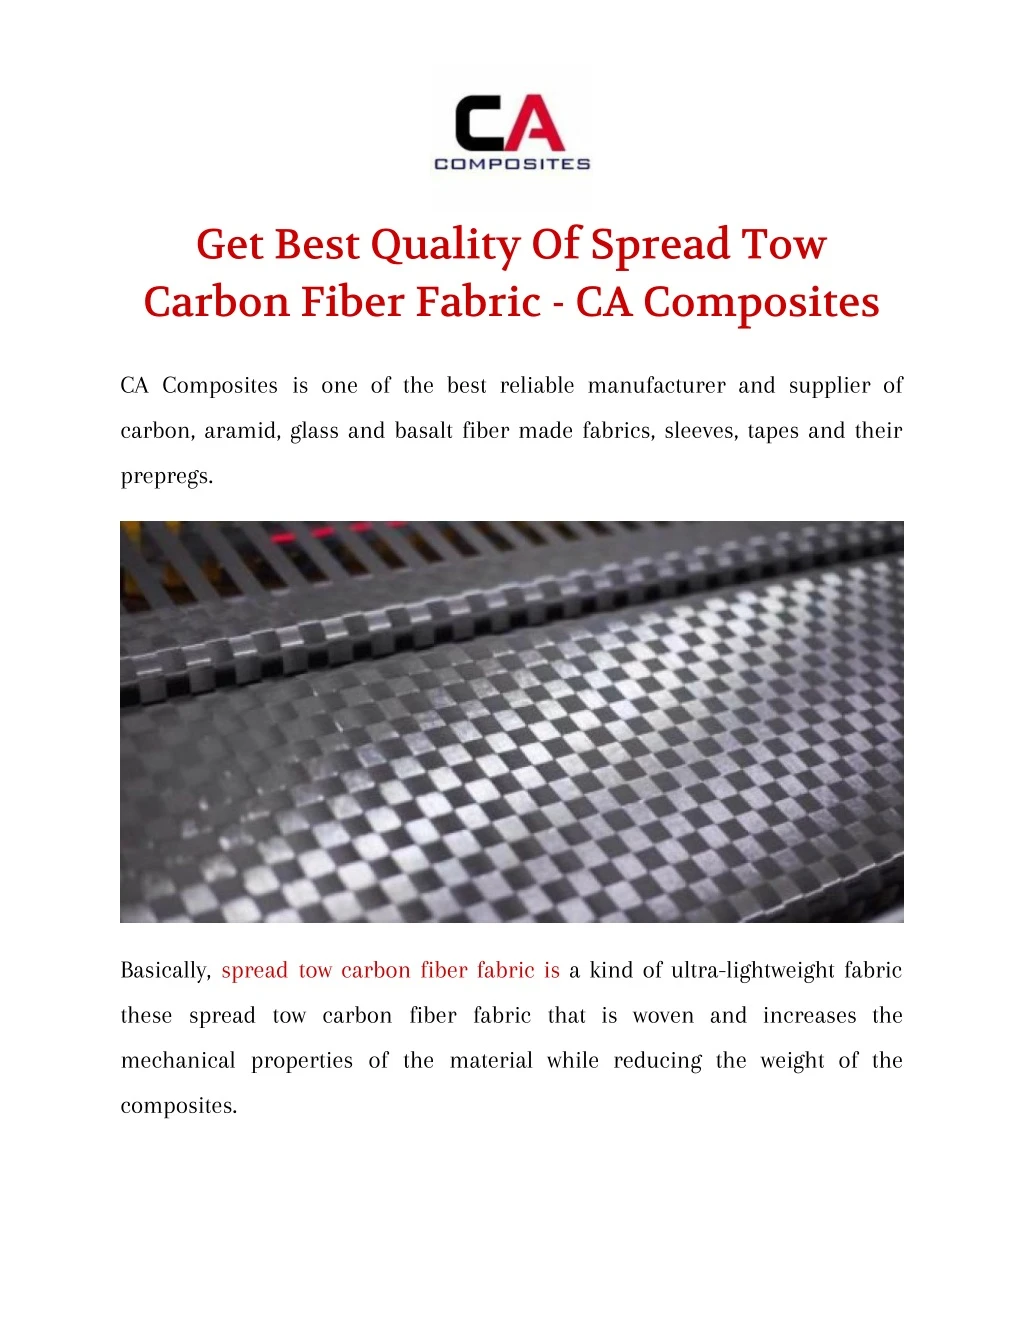 get best quality of spread tow carbon fiber